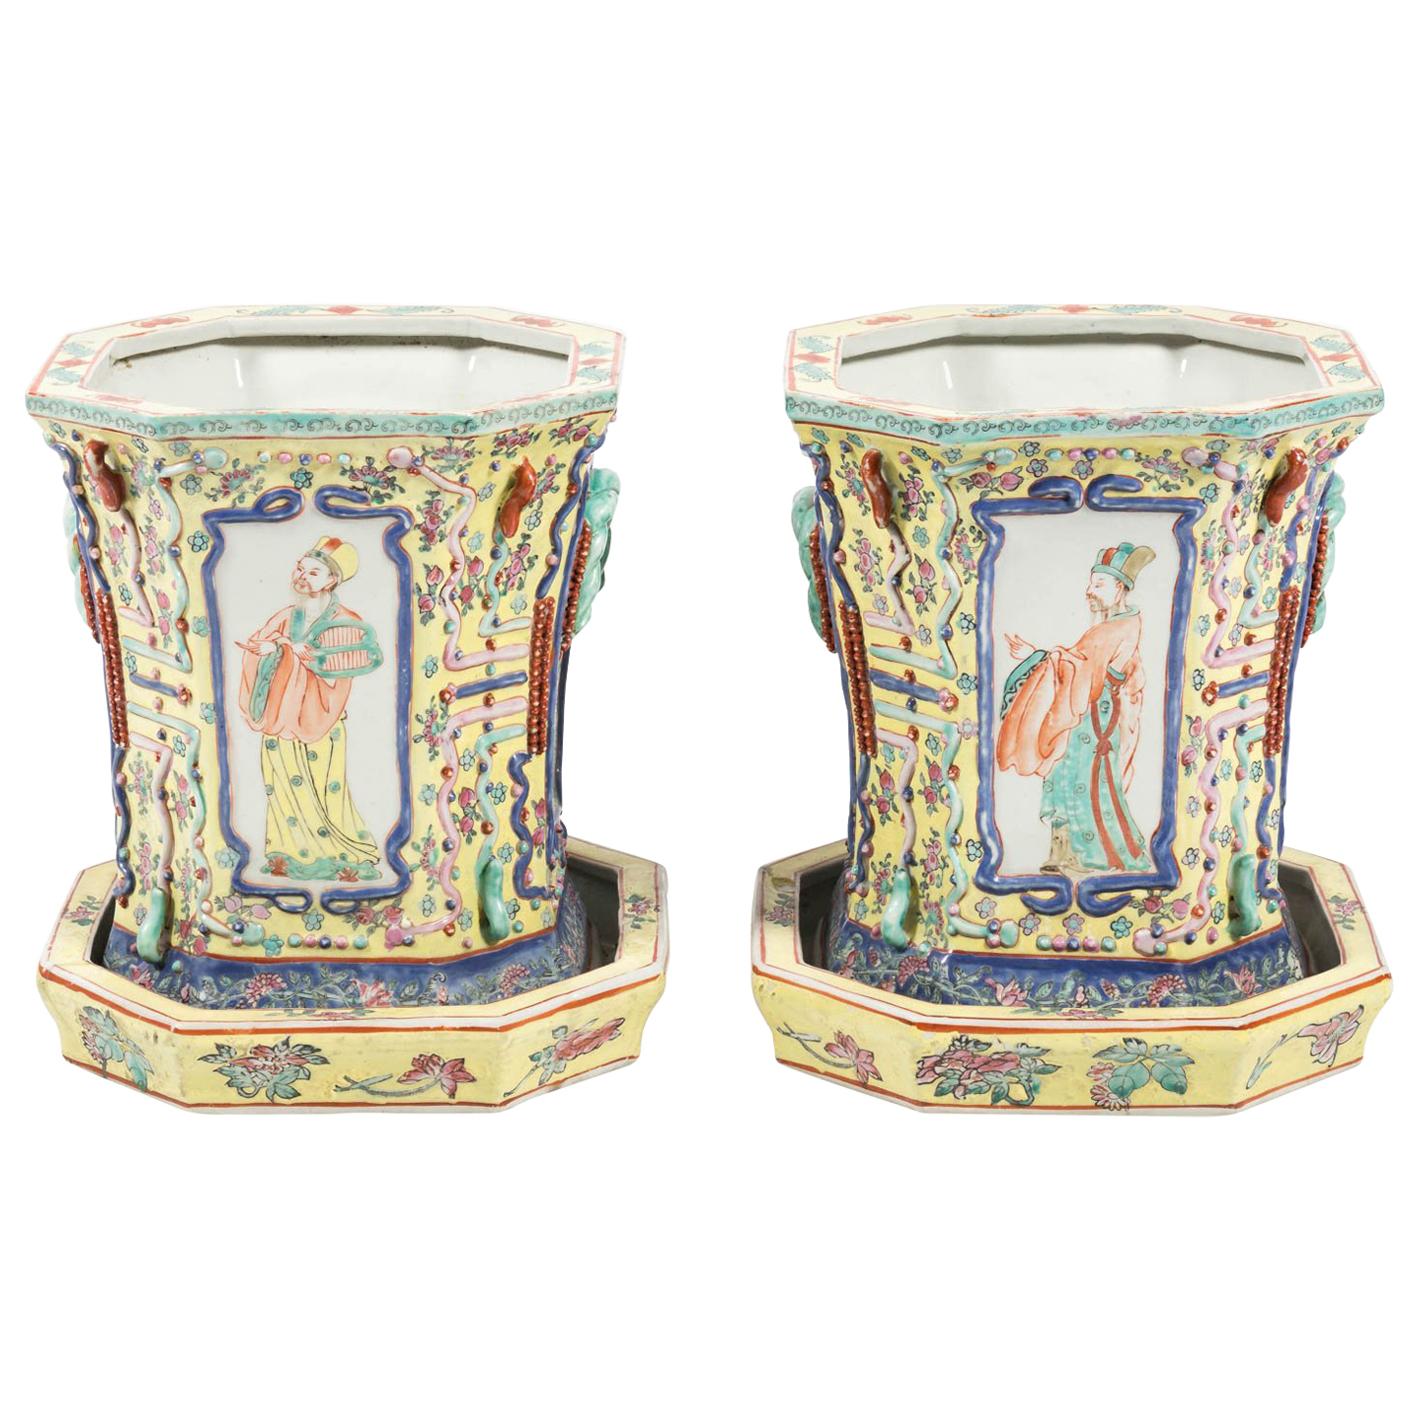 Pair of 19th Century Chinese Cachepots